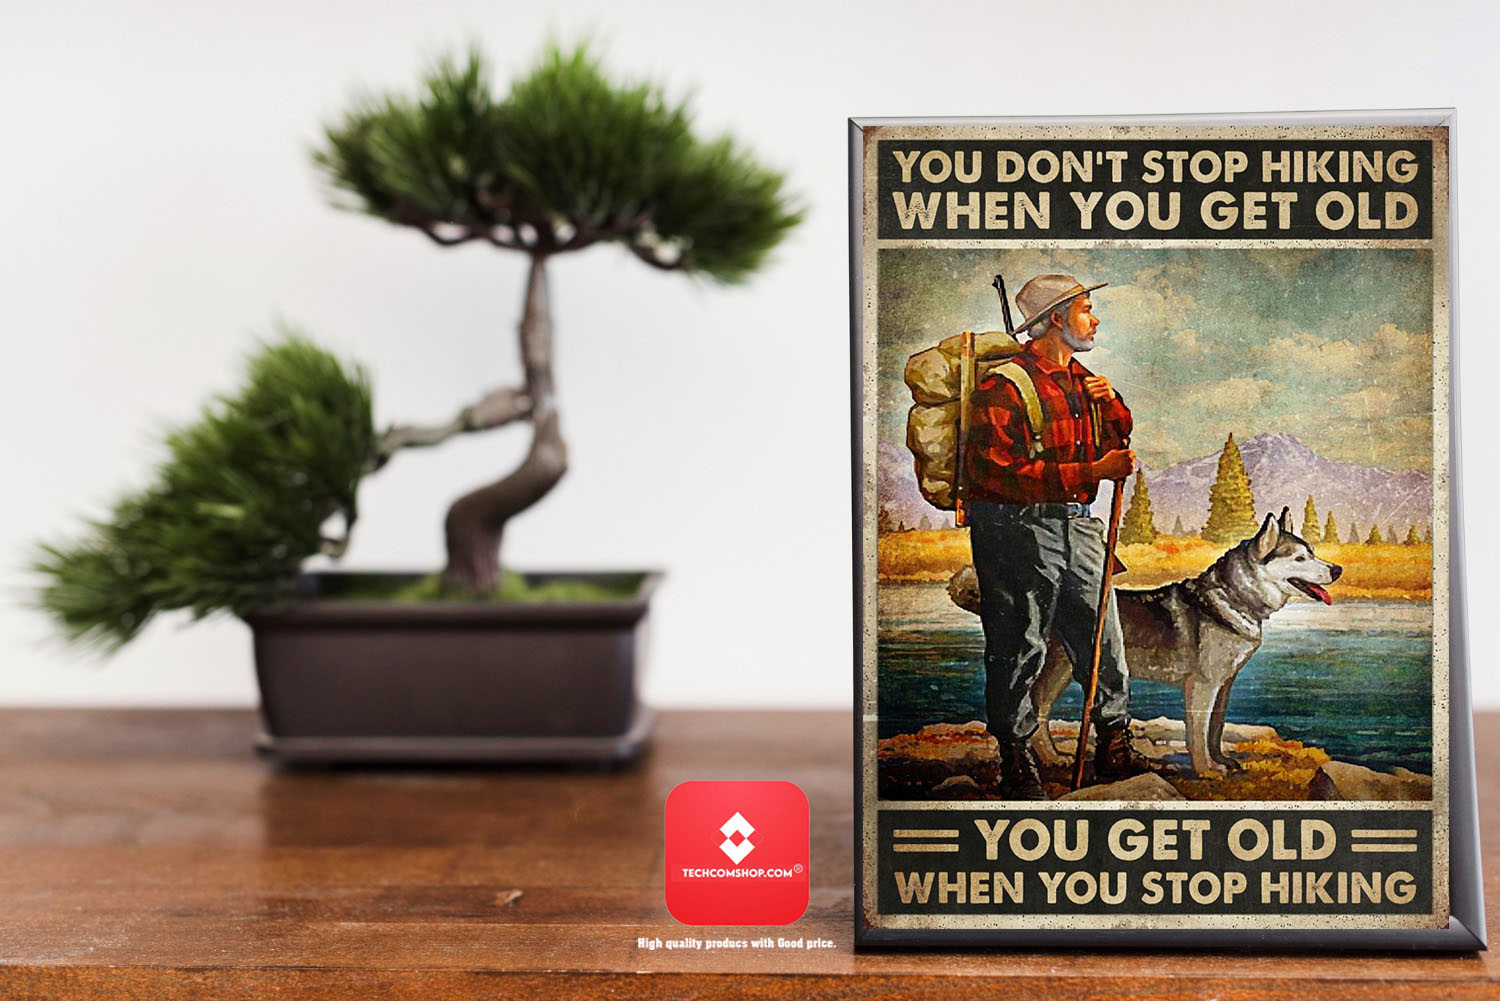 You don't stop hiking when you get old poster11